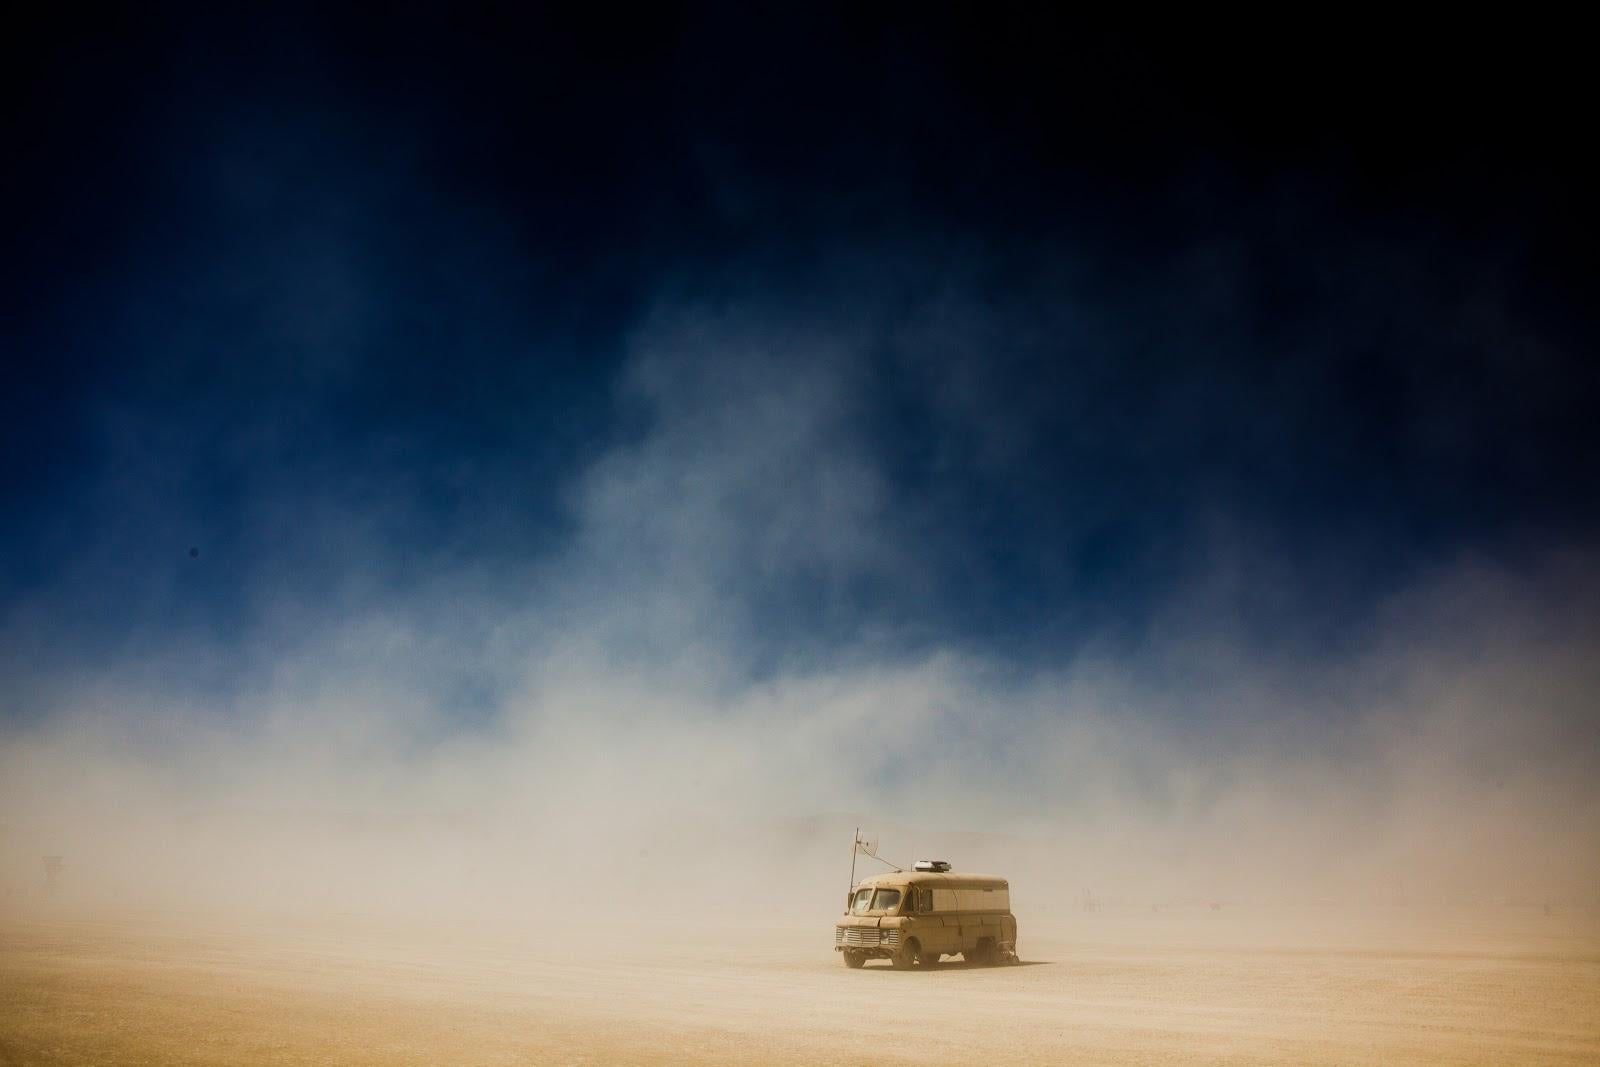 'Mad Max II' (Burning Man) Edition 2/10, 20x30cm, 2016, Color-Print, printed on Velvet Watercolor, 310gsm, Bright White, Acid Free, Signature label and Certificate.

About
Tao Ruspoli (born 7 November 1975) is an Italian-American filmmaker,